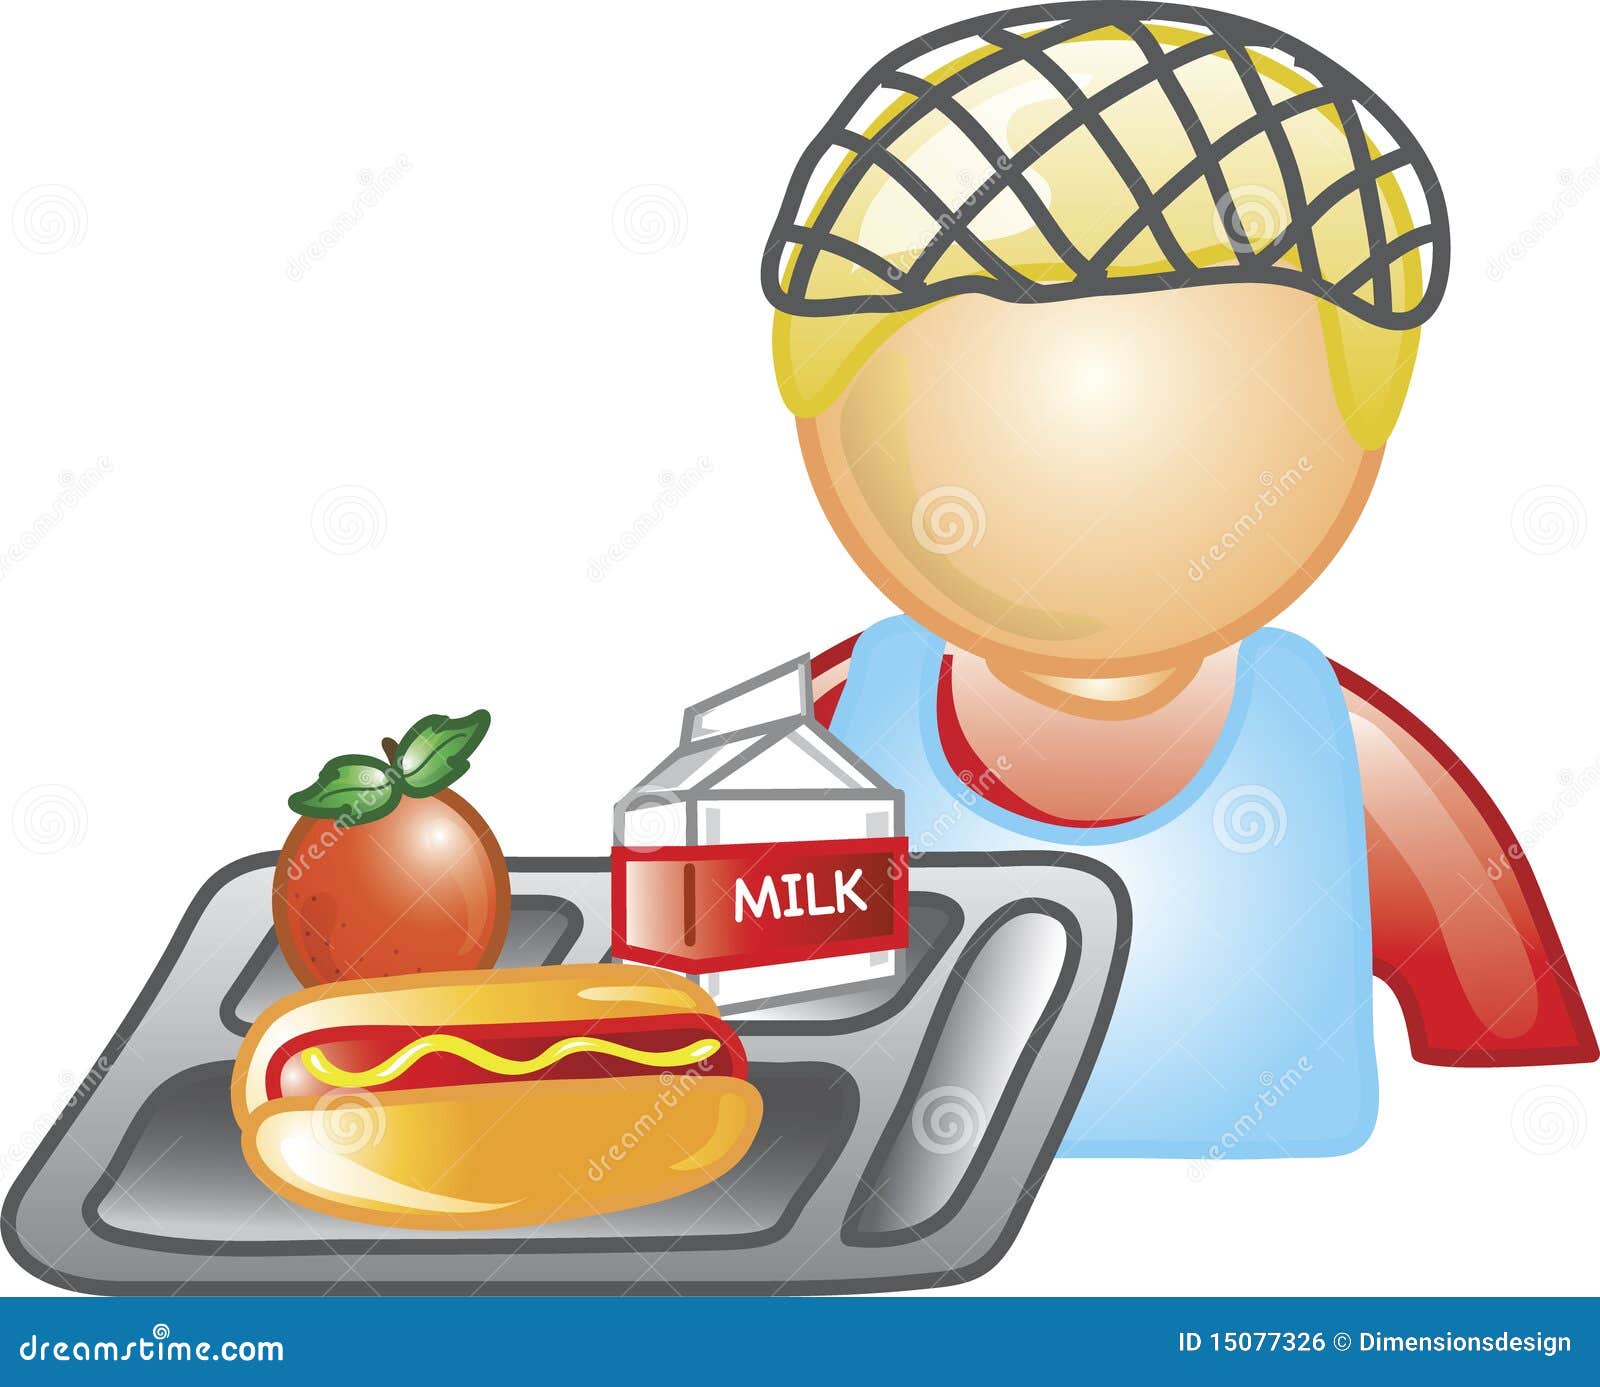 clipart cafeteria - photo #41